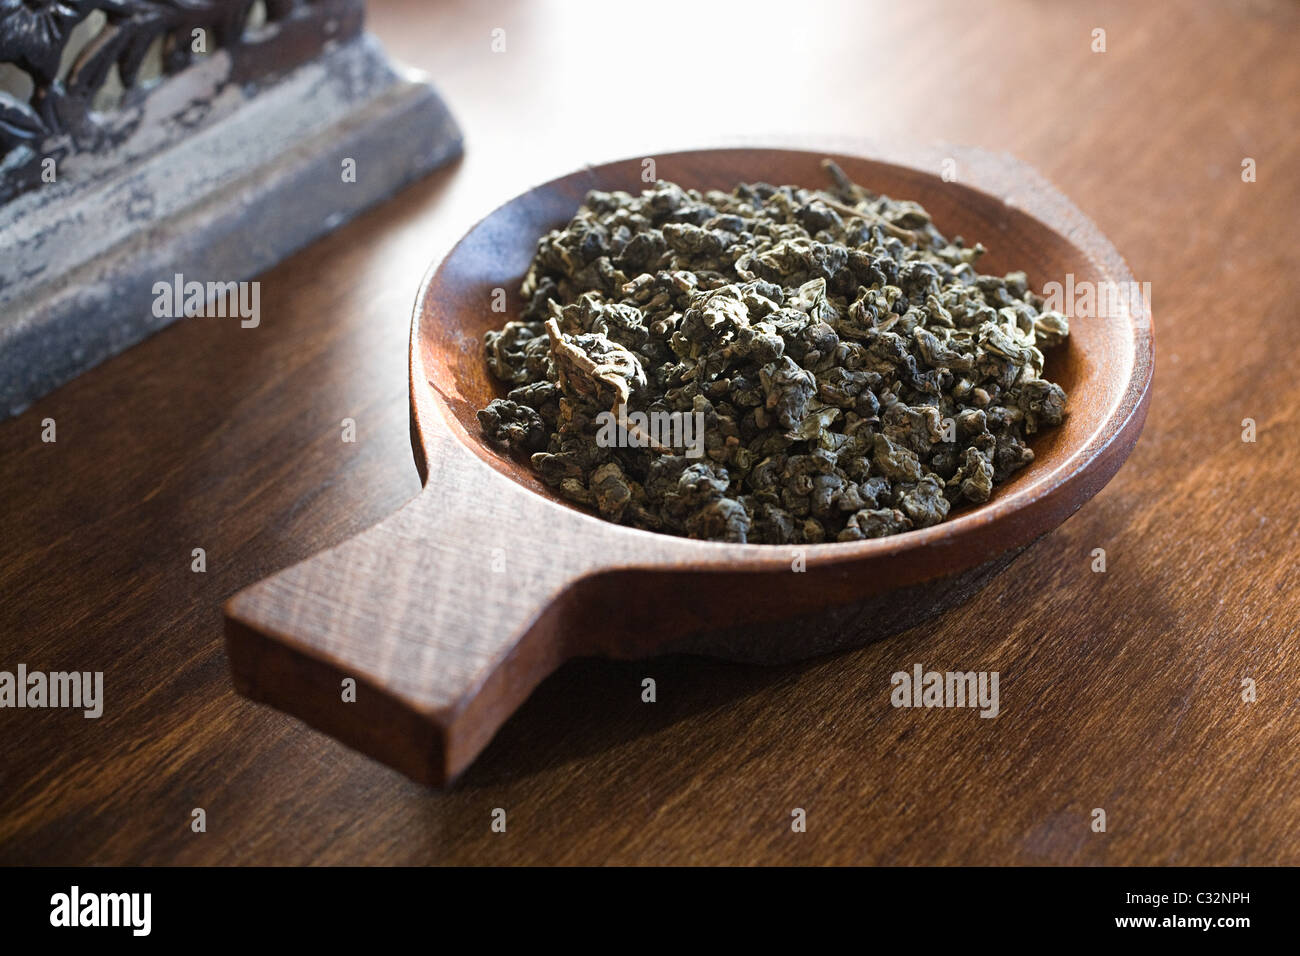 Tea leaves in wooden bowl Stock Photo